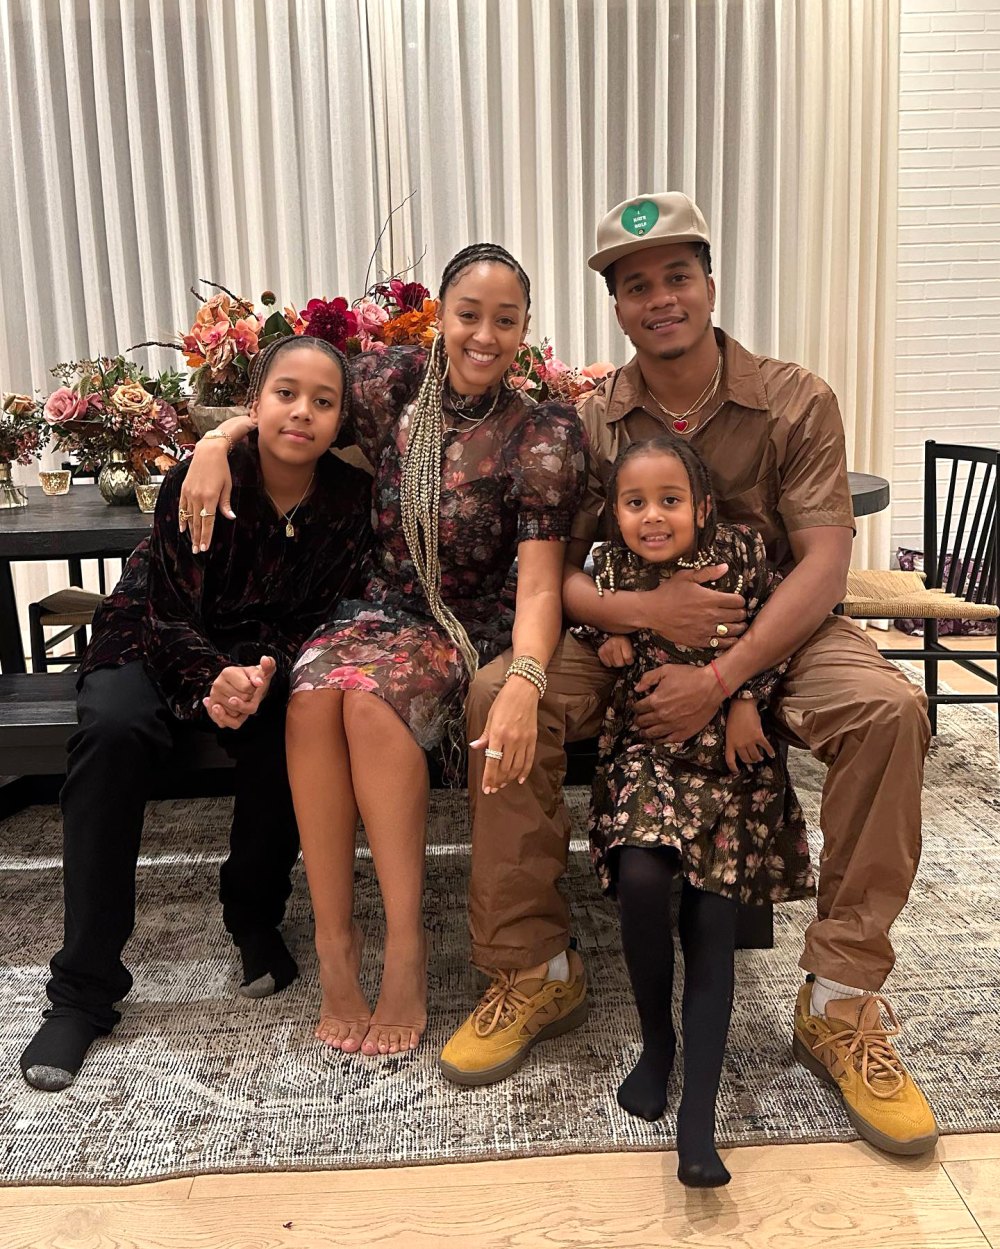 Tia Mowry and Ex-Husband Cory Hardrict Spent Thanksgiving Together With Kids: Going to 'Be Alright'